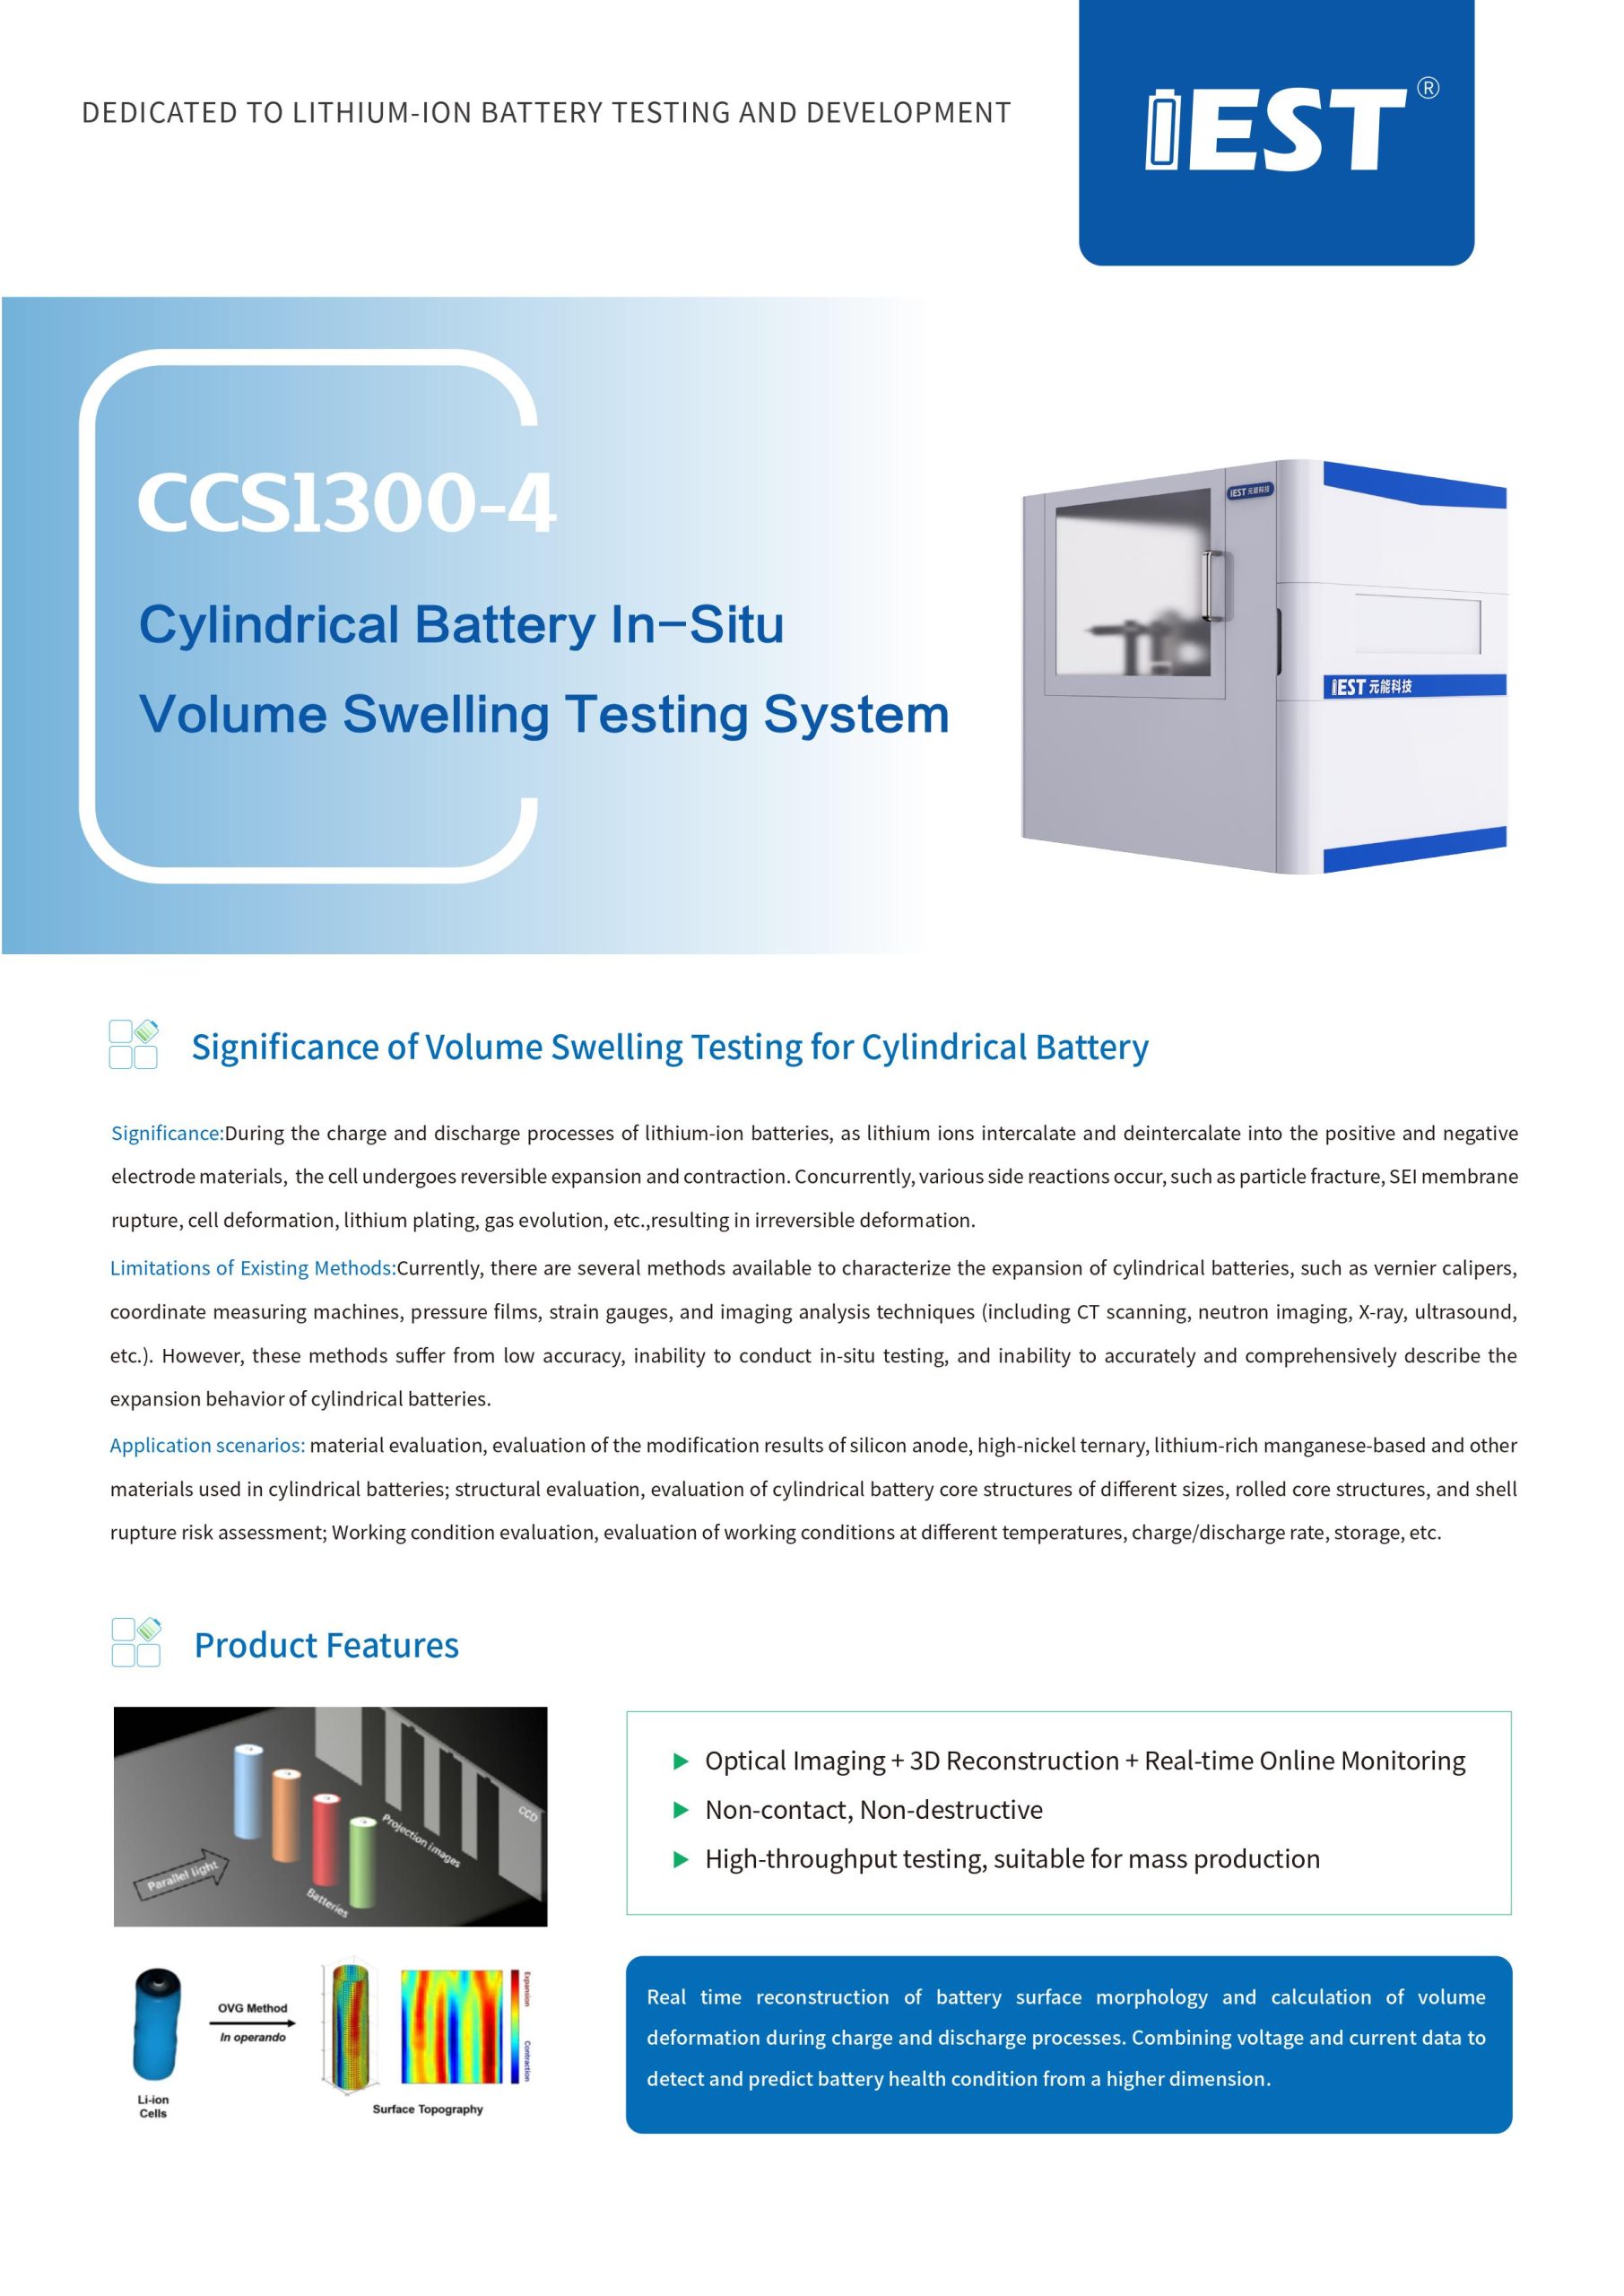 IEST Cylindrical Battery In-Situ Volume Swelling Testing System(CCS1300)